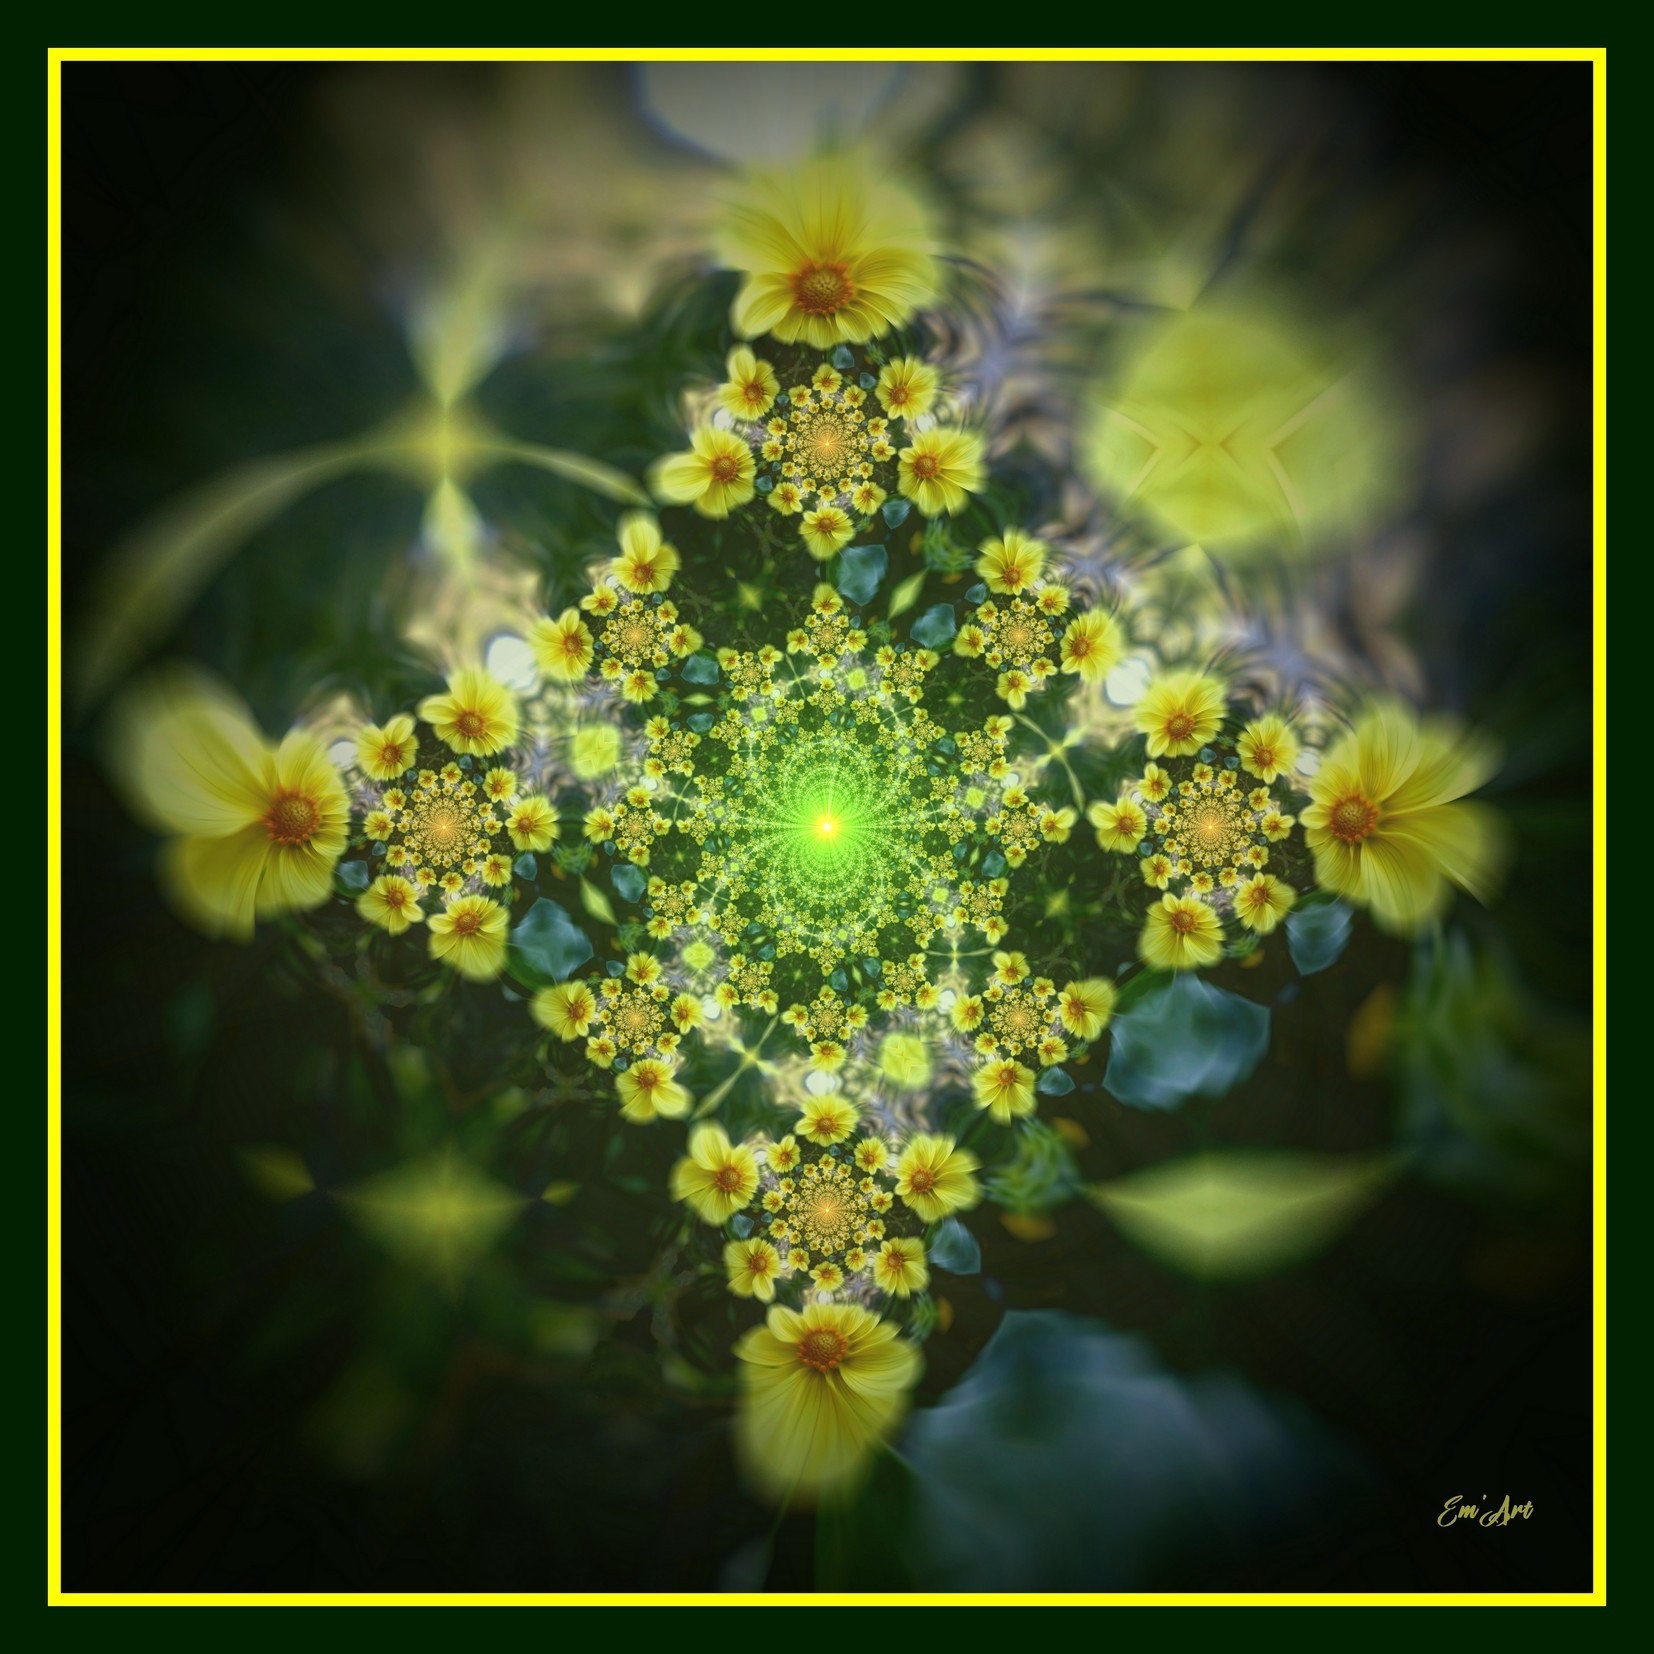 Solar Flower II, surreal floral photography by Emmanuelle Baudry